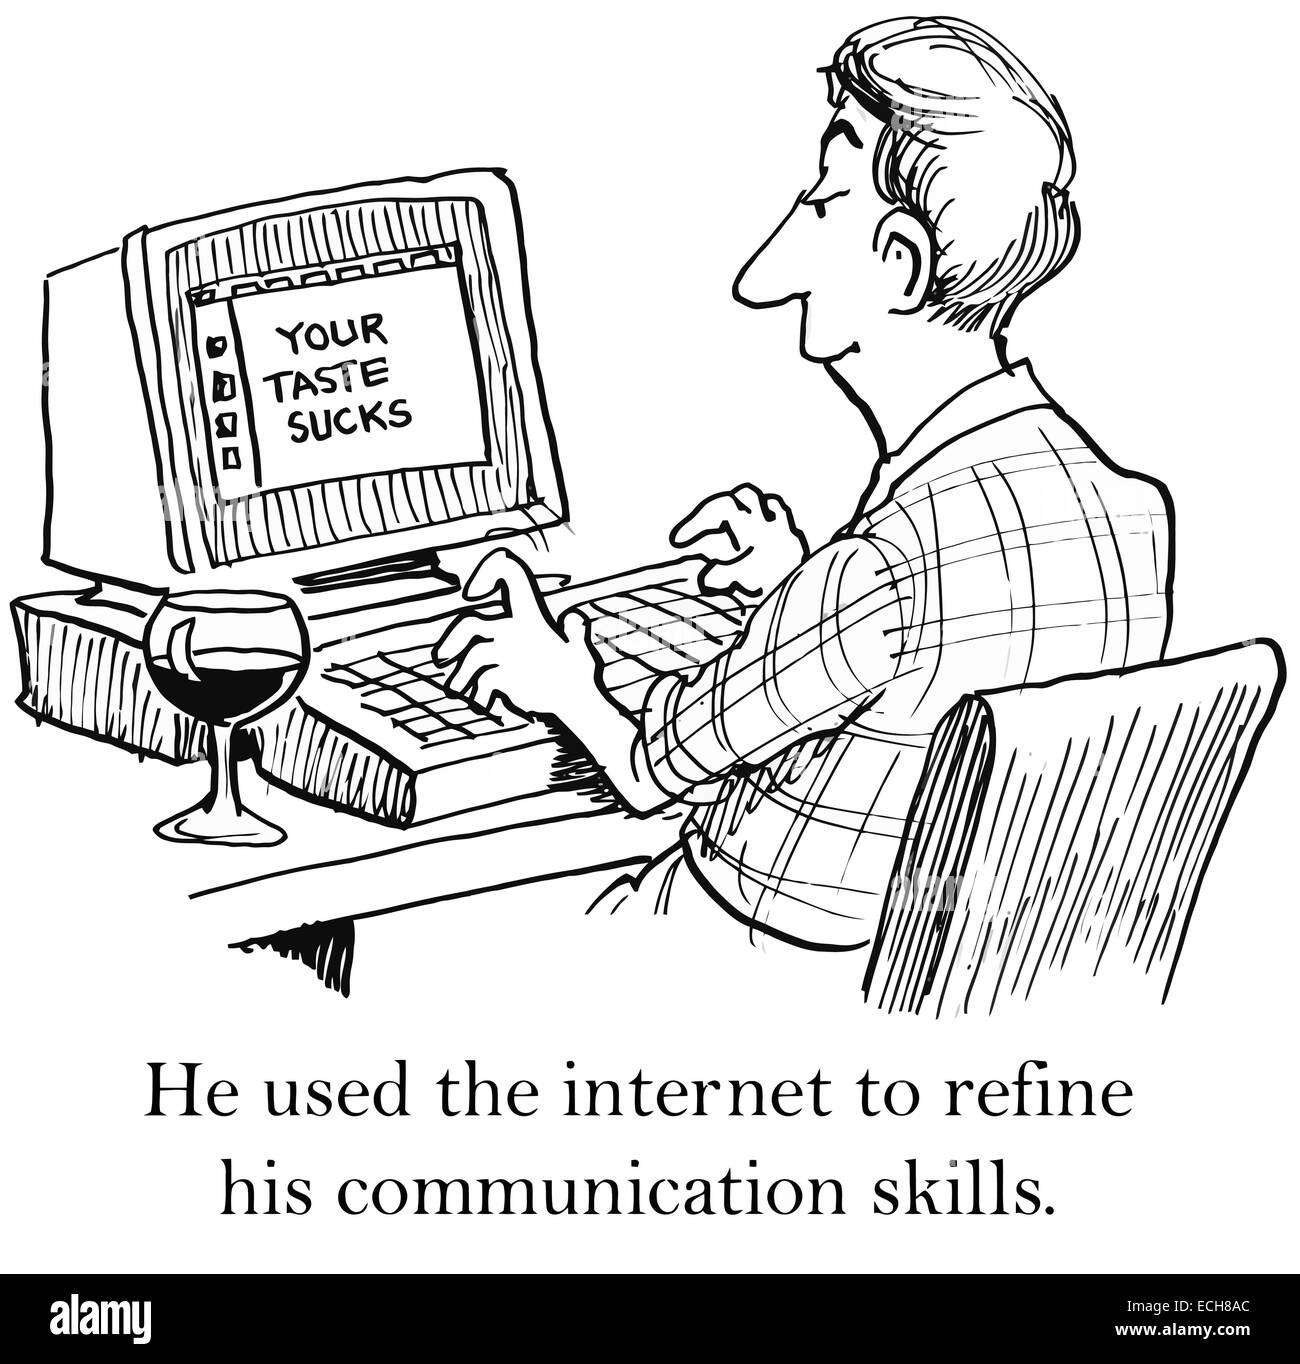 He used the internet to refine his communication skills. Stock Vector